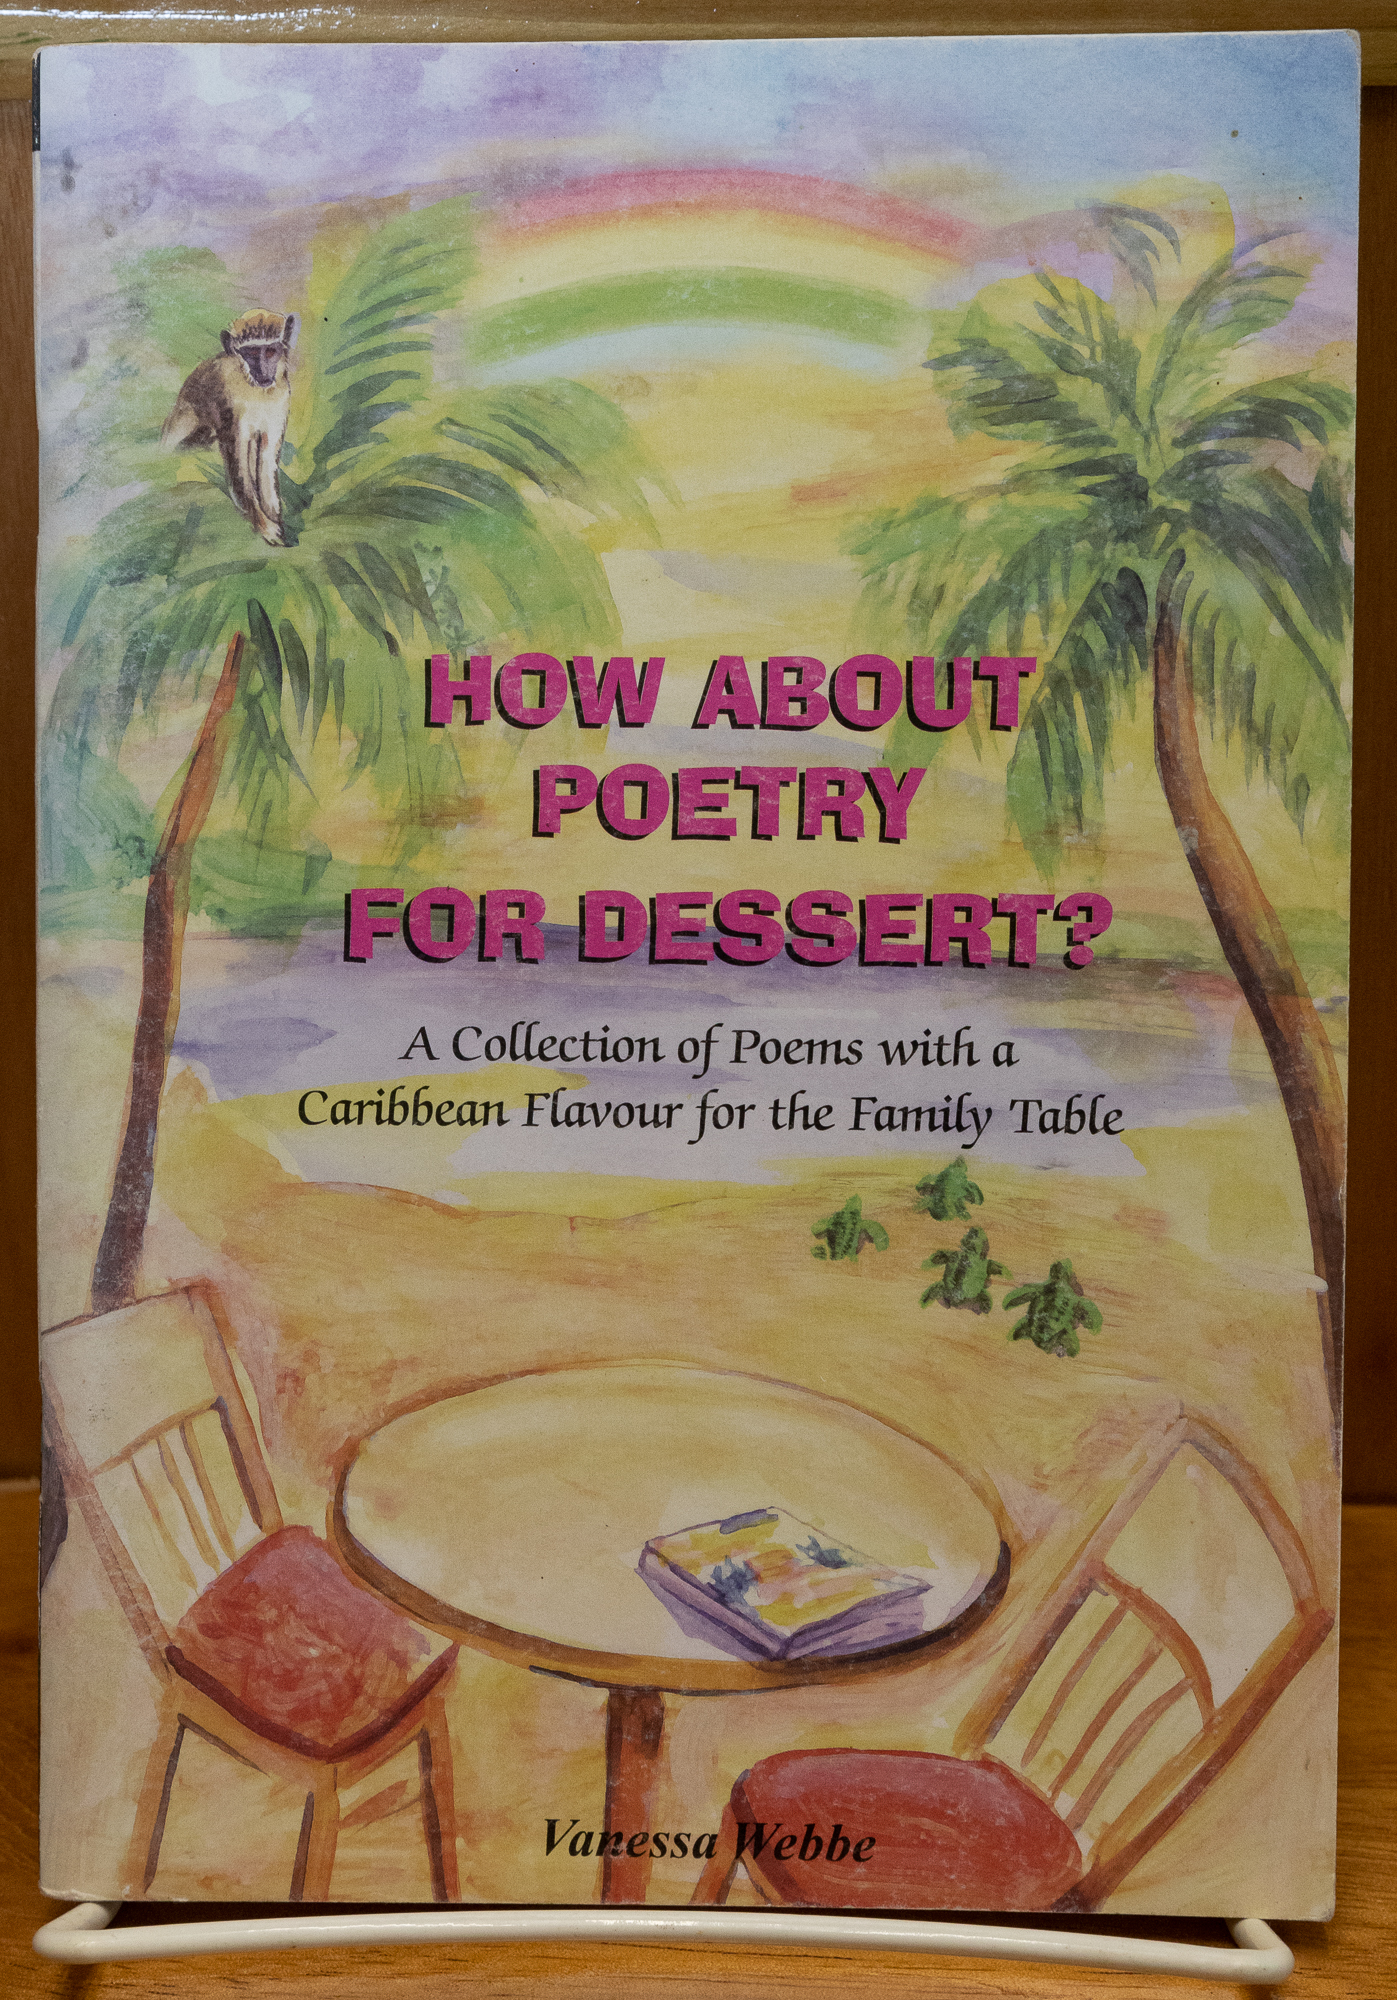 How About Poetry for Dessert?